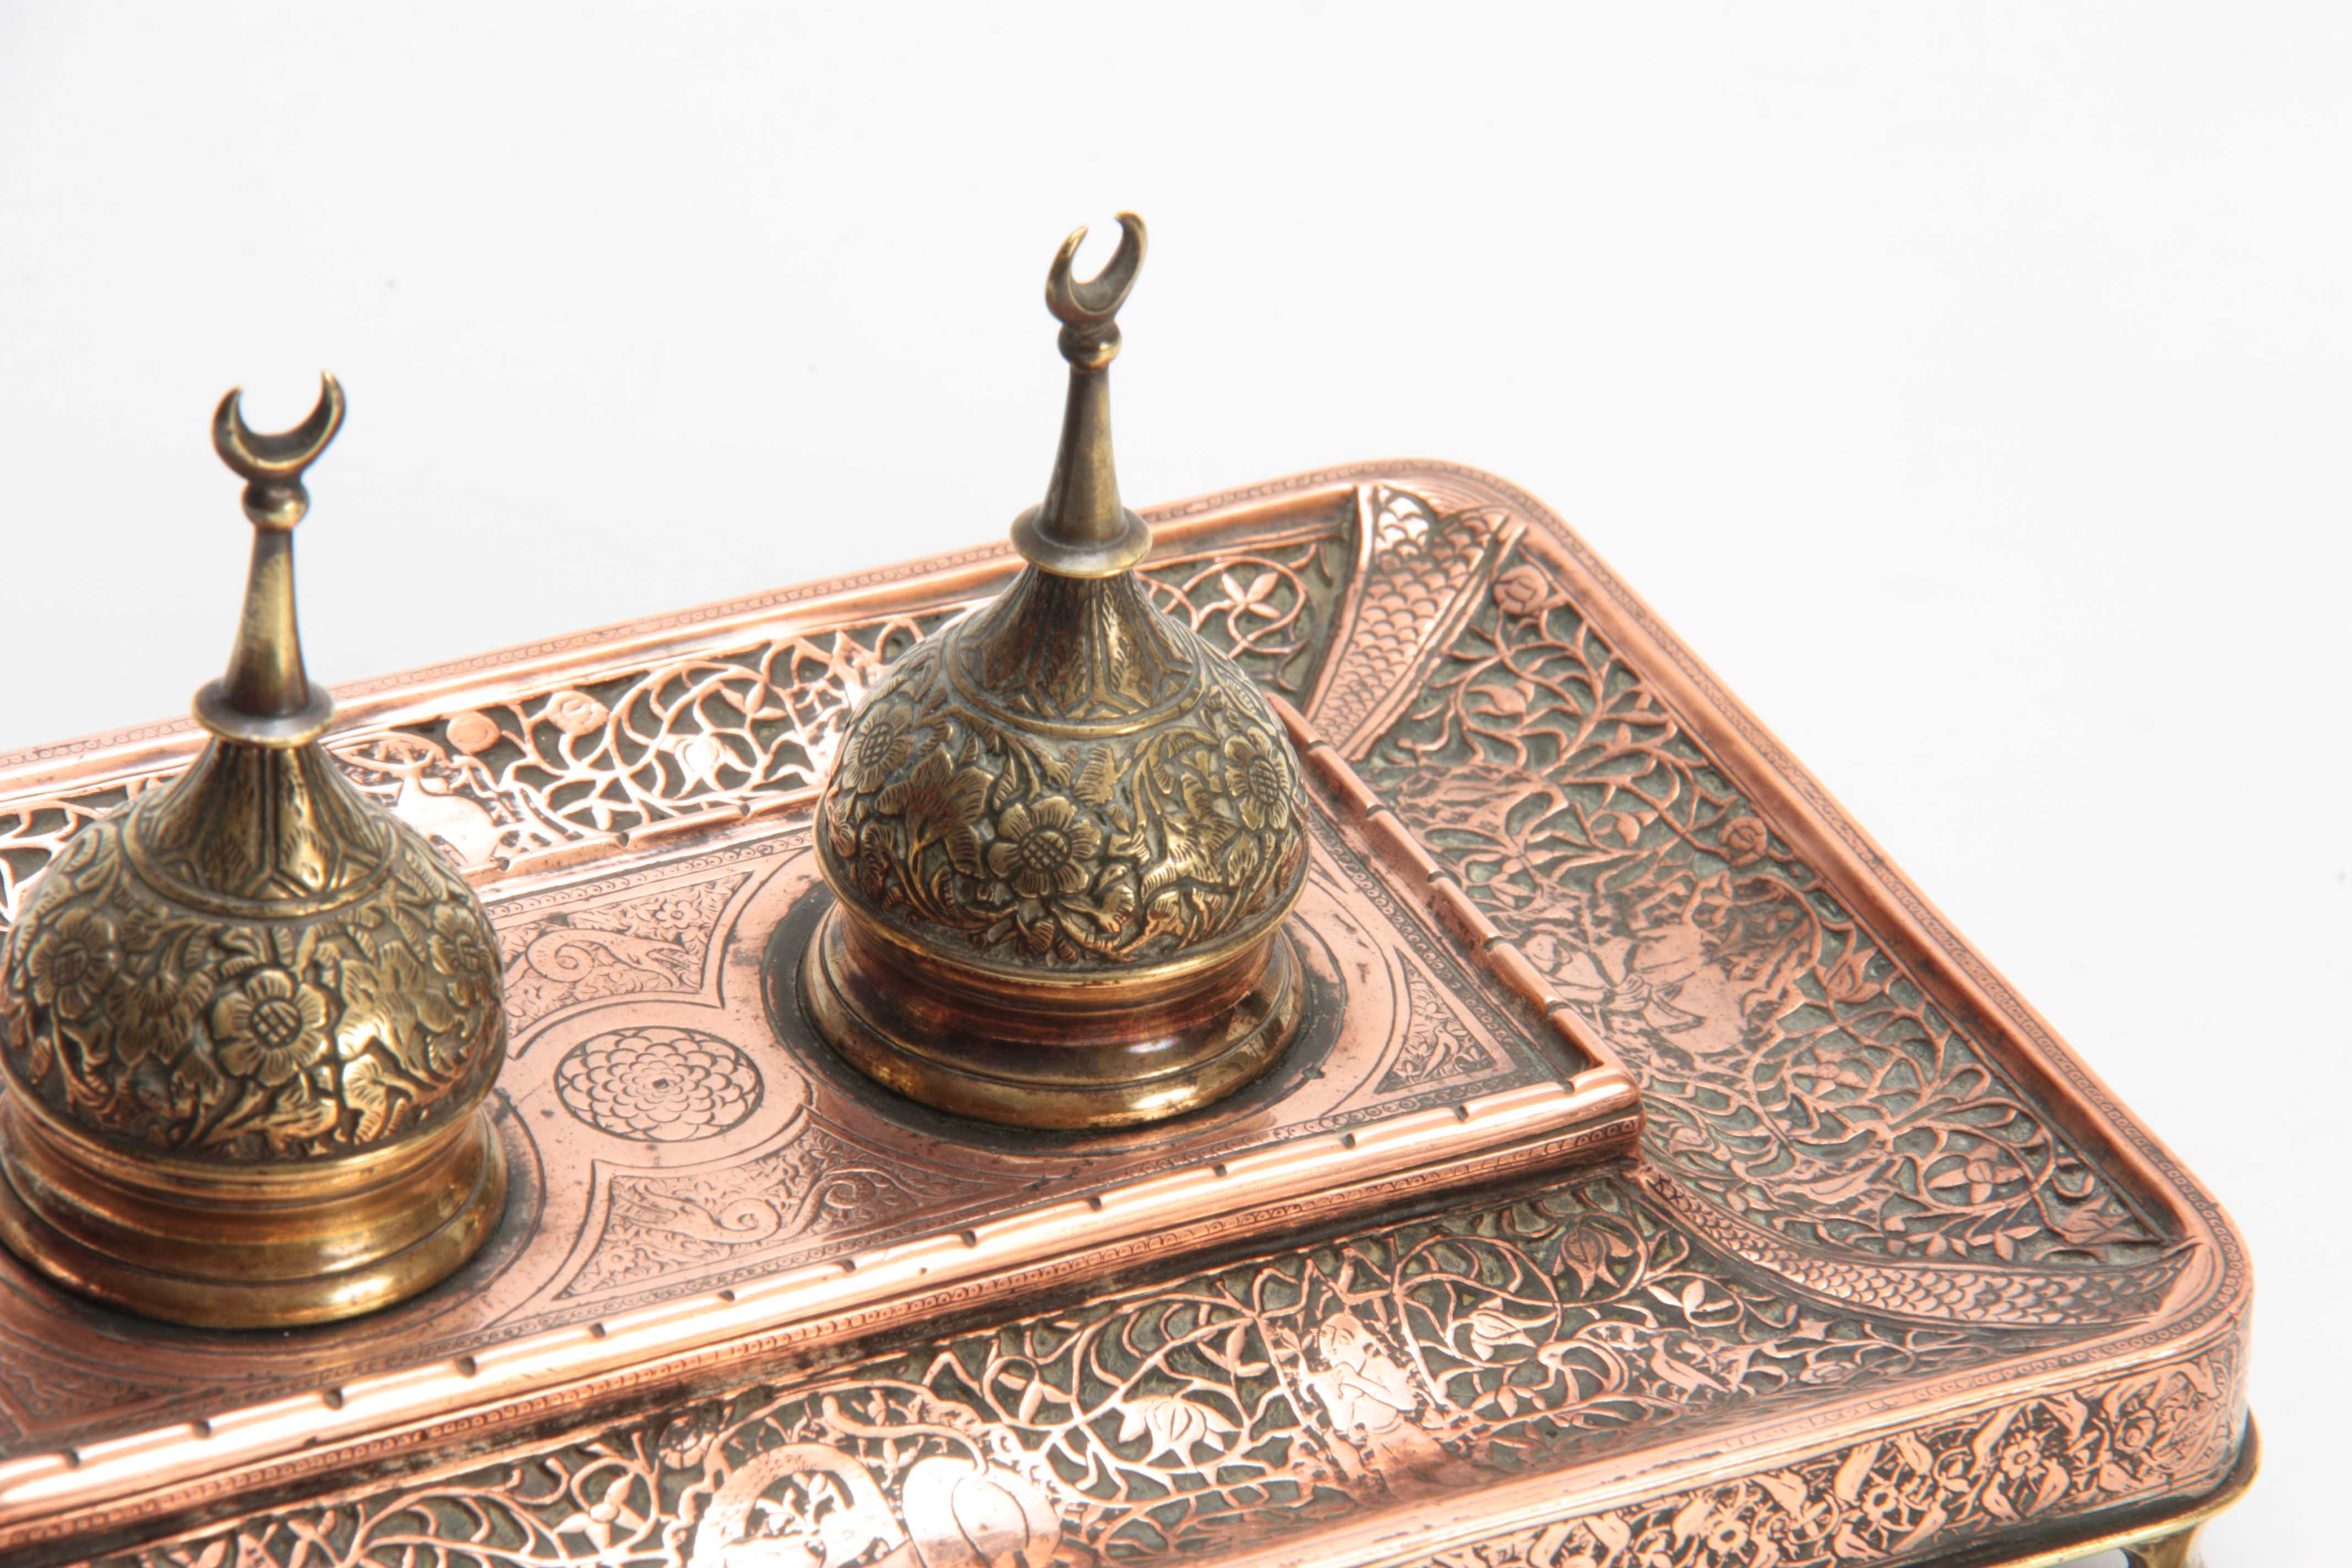 A 19TH CENTURY COPPER AND BRASS PERSIAN STYLE INK STAND with dome-shaped lids and Turkish moons - Image 2 of 5